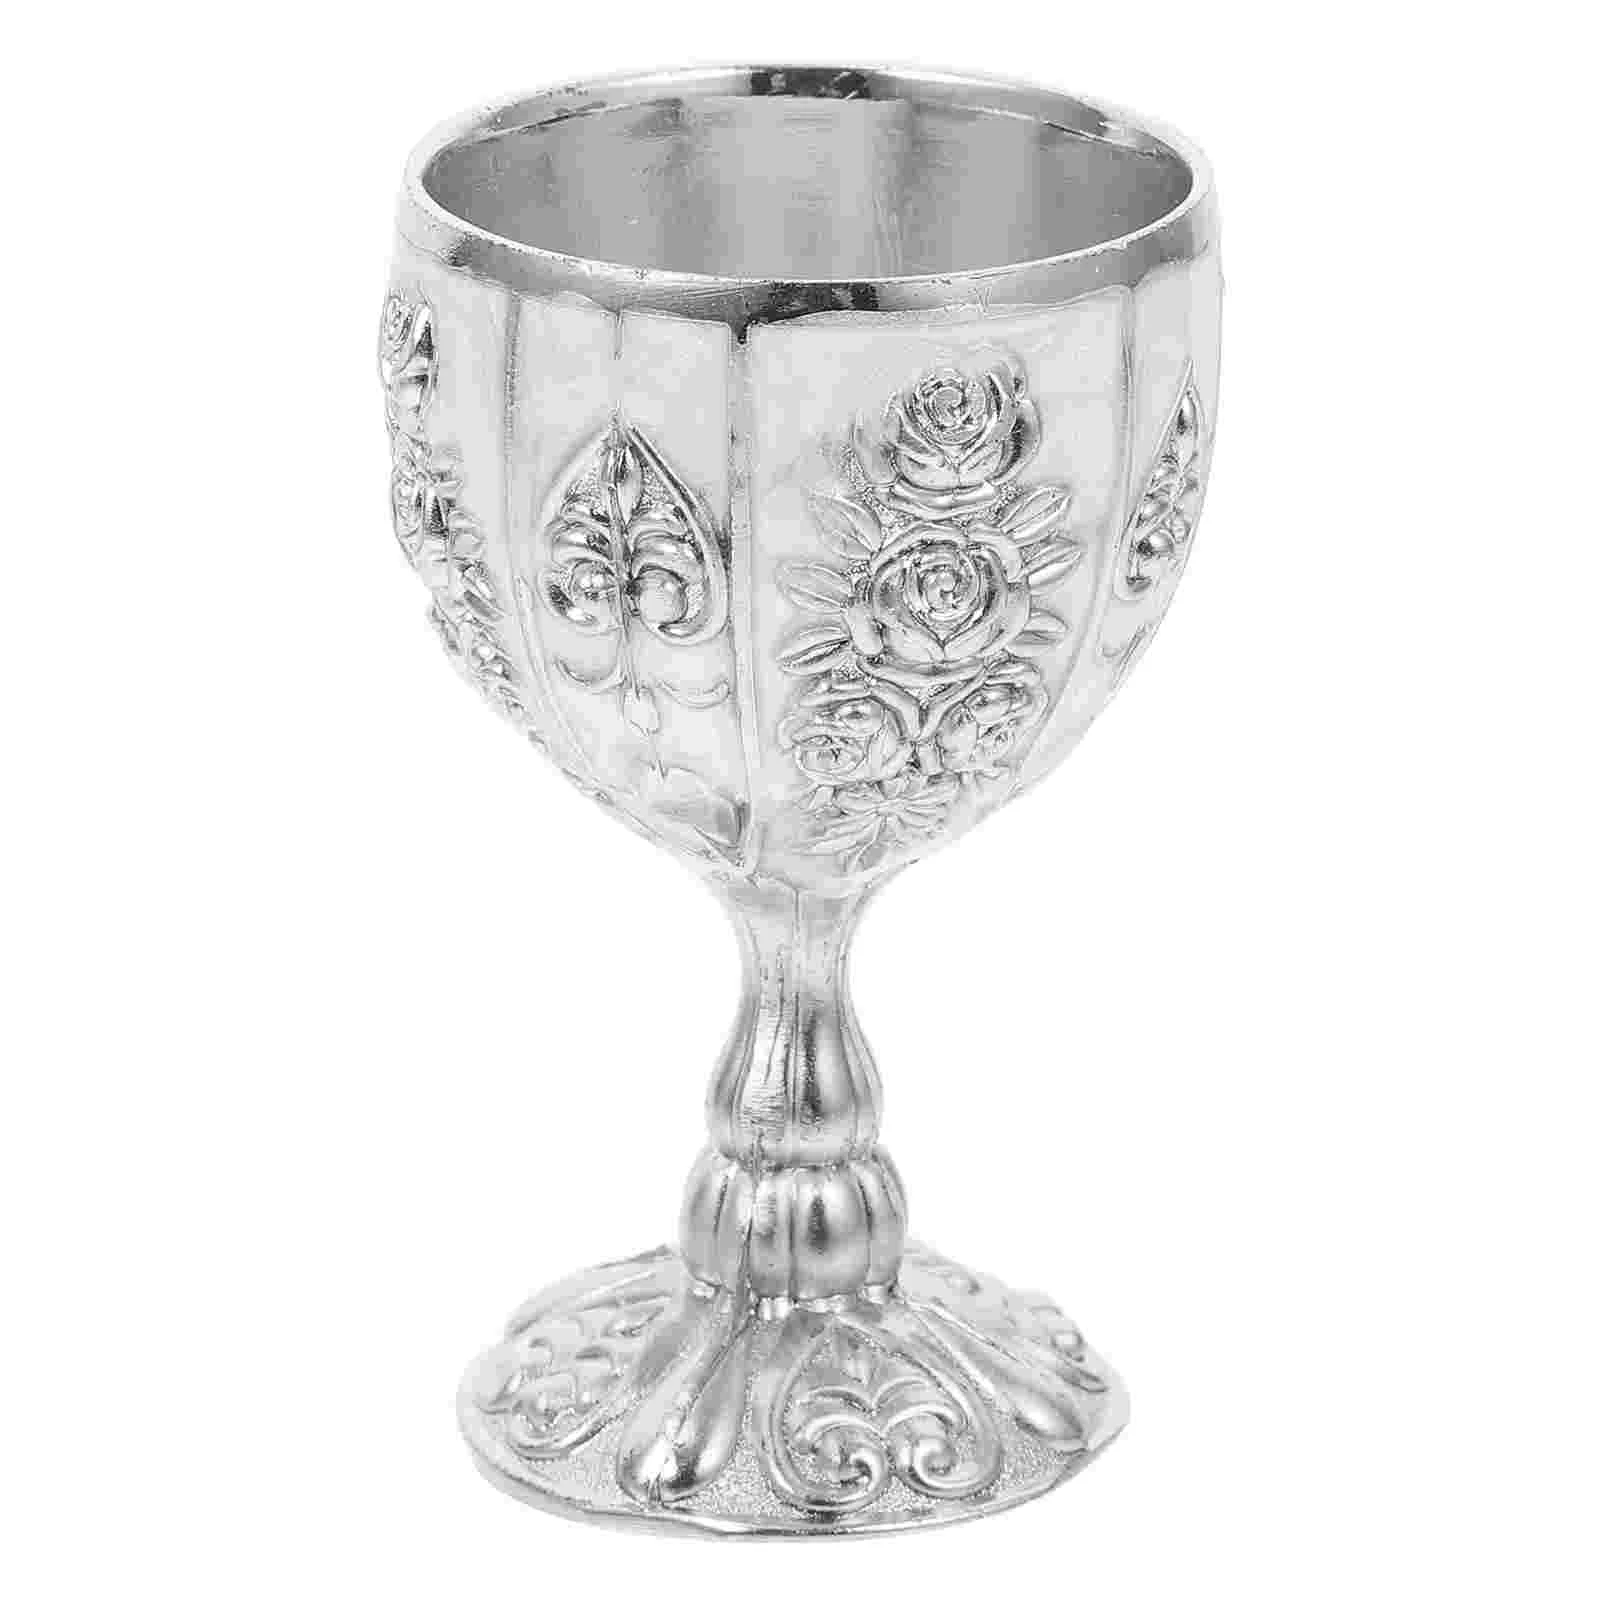 

Cup Goblet Chalice Glasses Vintage Metal Cups Retro European Cocktail Medieval Champagne Drinking Style Royal Goblets Gothic